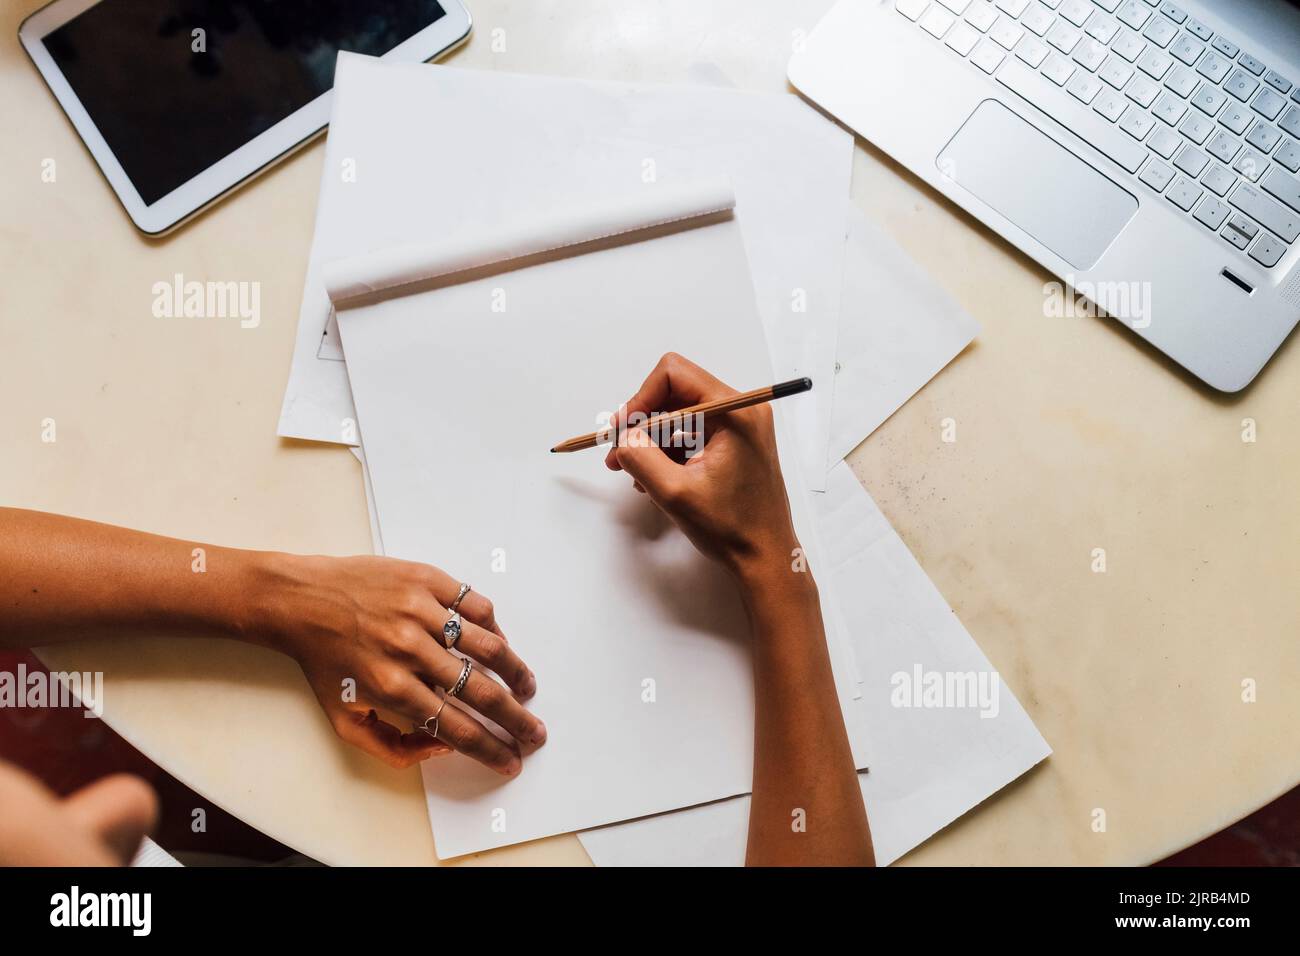 Hand of fashion designer holding pencil on sketch pad at desk Stock Photo